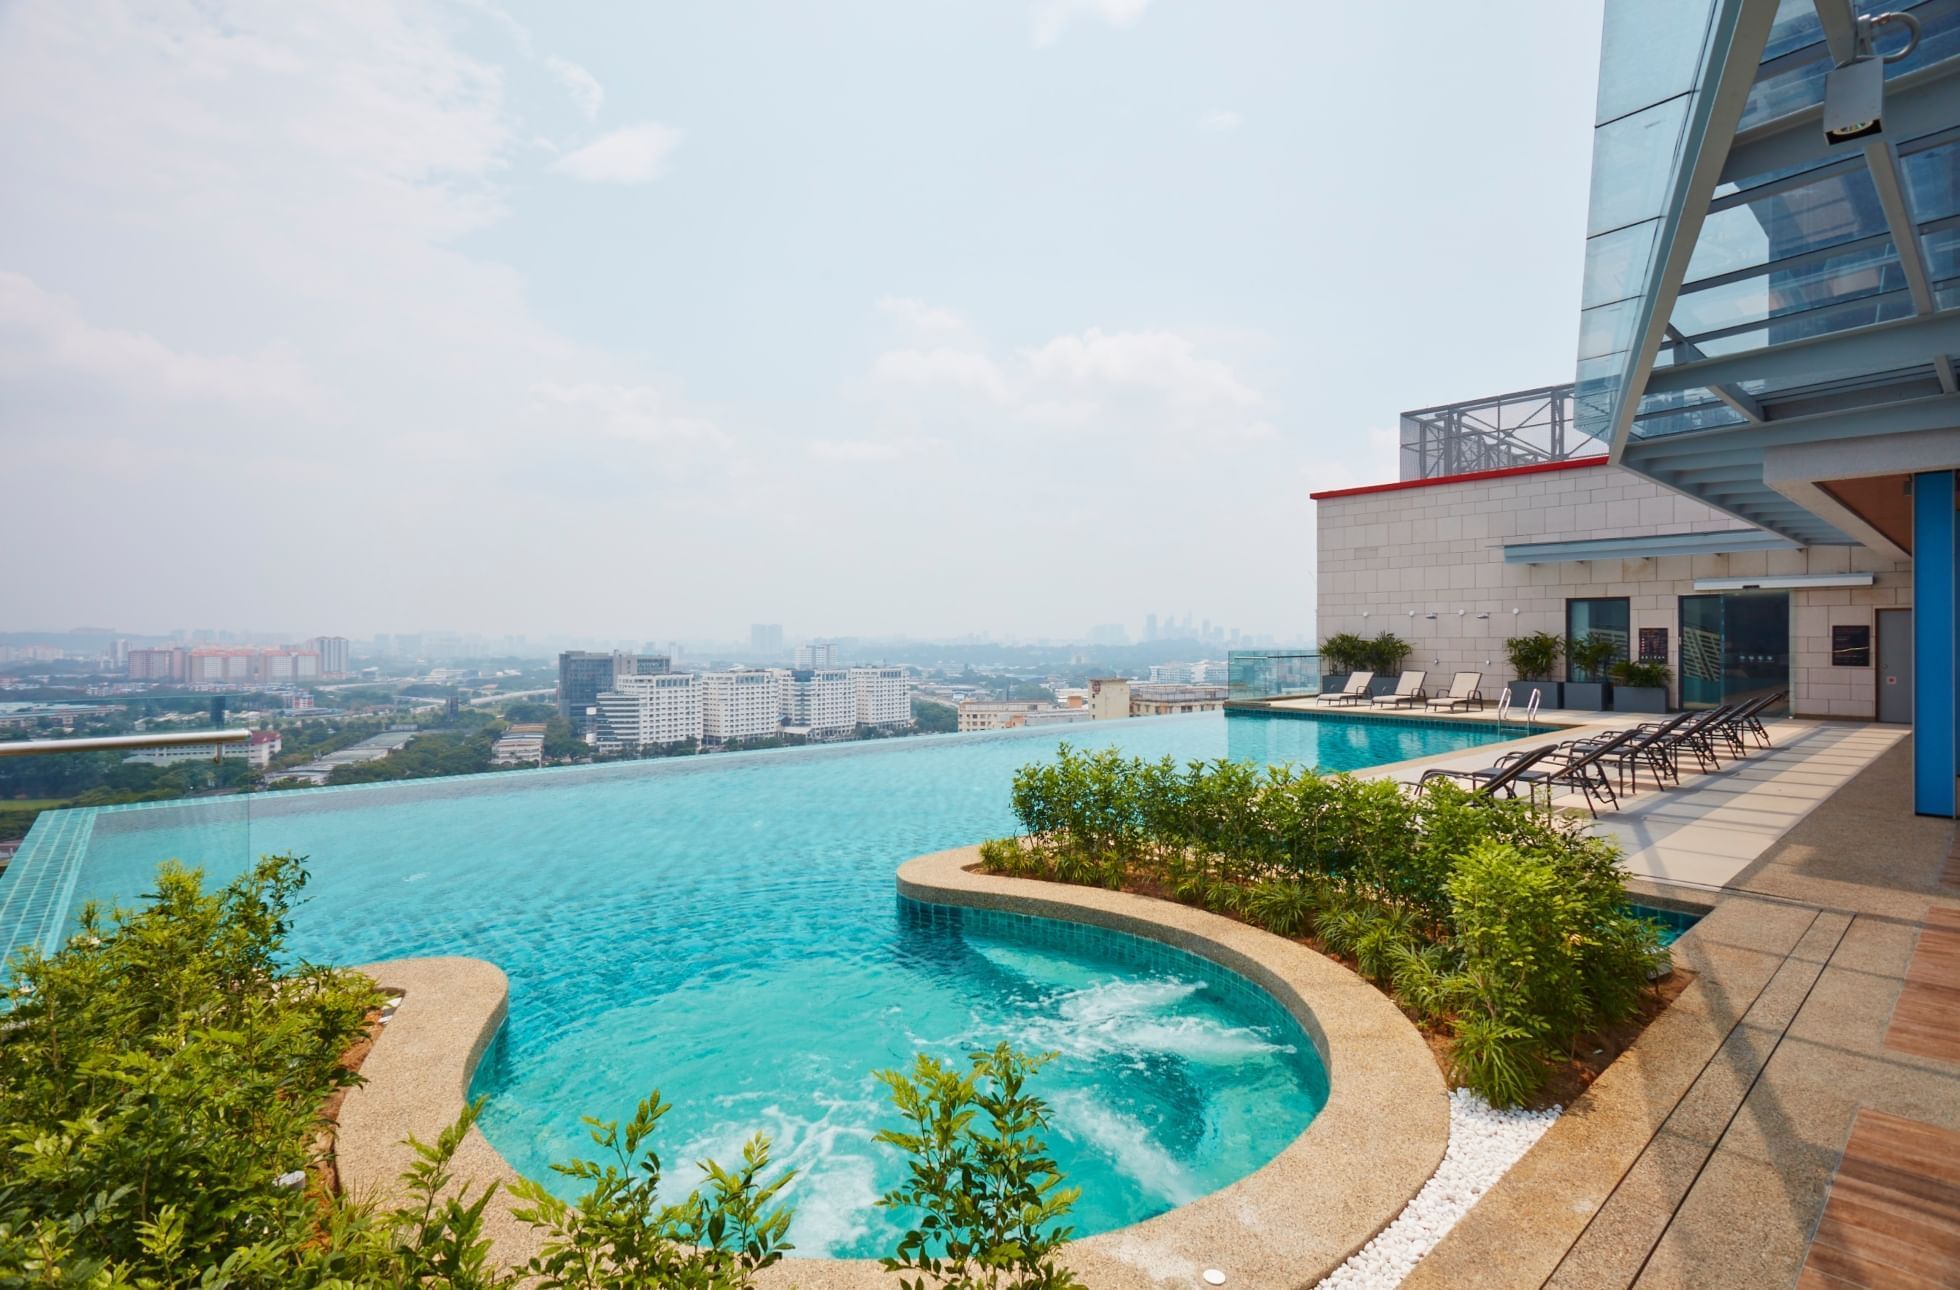 Jacuzzi at Sunway Velocity Hotel rooftop Infinity pool 